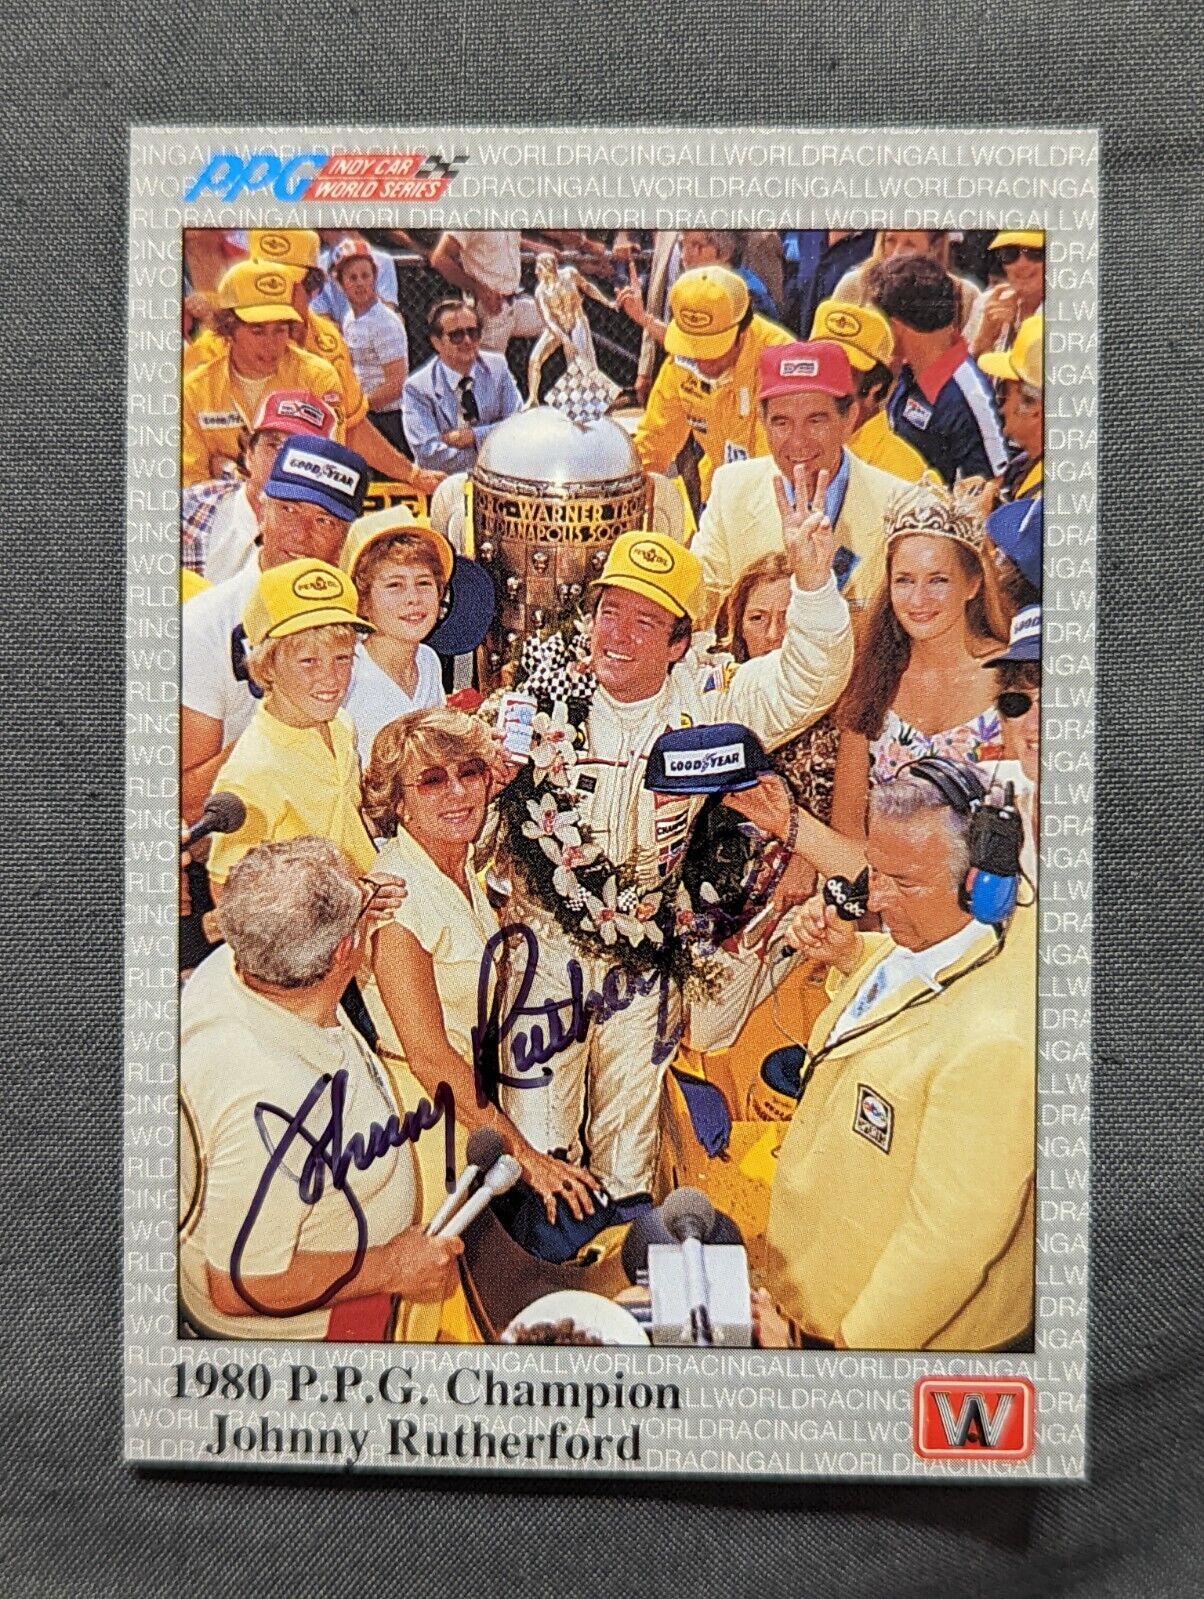 Johnny Rutherford Autographed Signed 1991 AW Sports Card Indy 500 Car Champion 